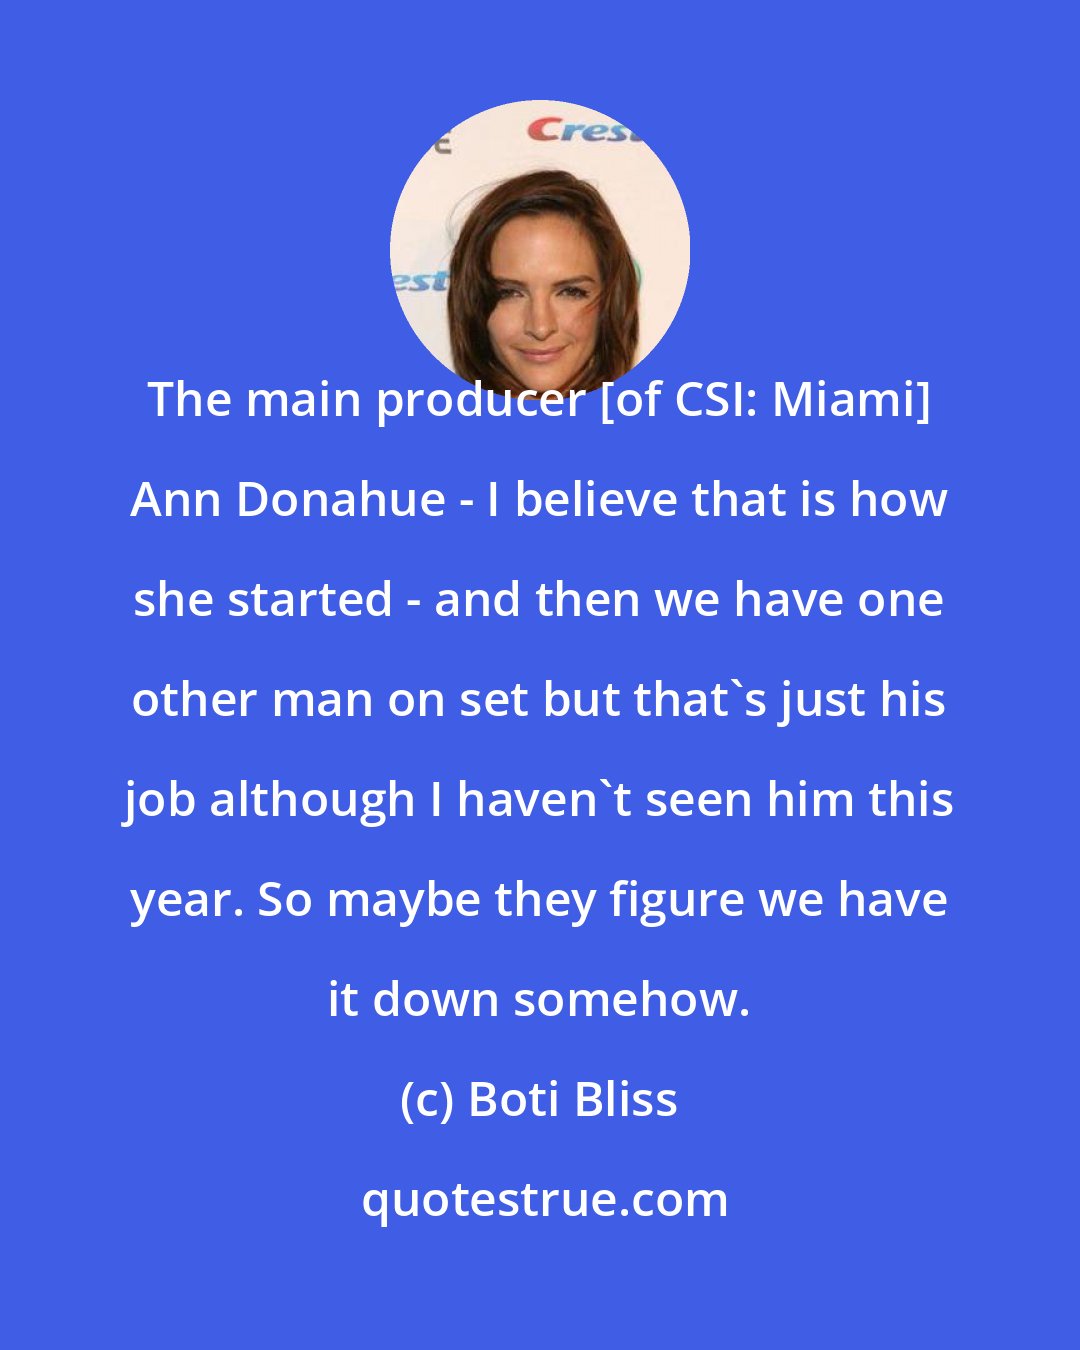 Boti Bliss: The main producer [of CSI: Miami] Ann Donahue - I believe that is how she started - and then we have one other man on set but that's just his job although I haven't seen him this year. So maybe they figure we have it down somehow.